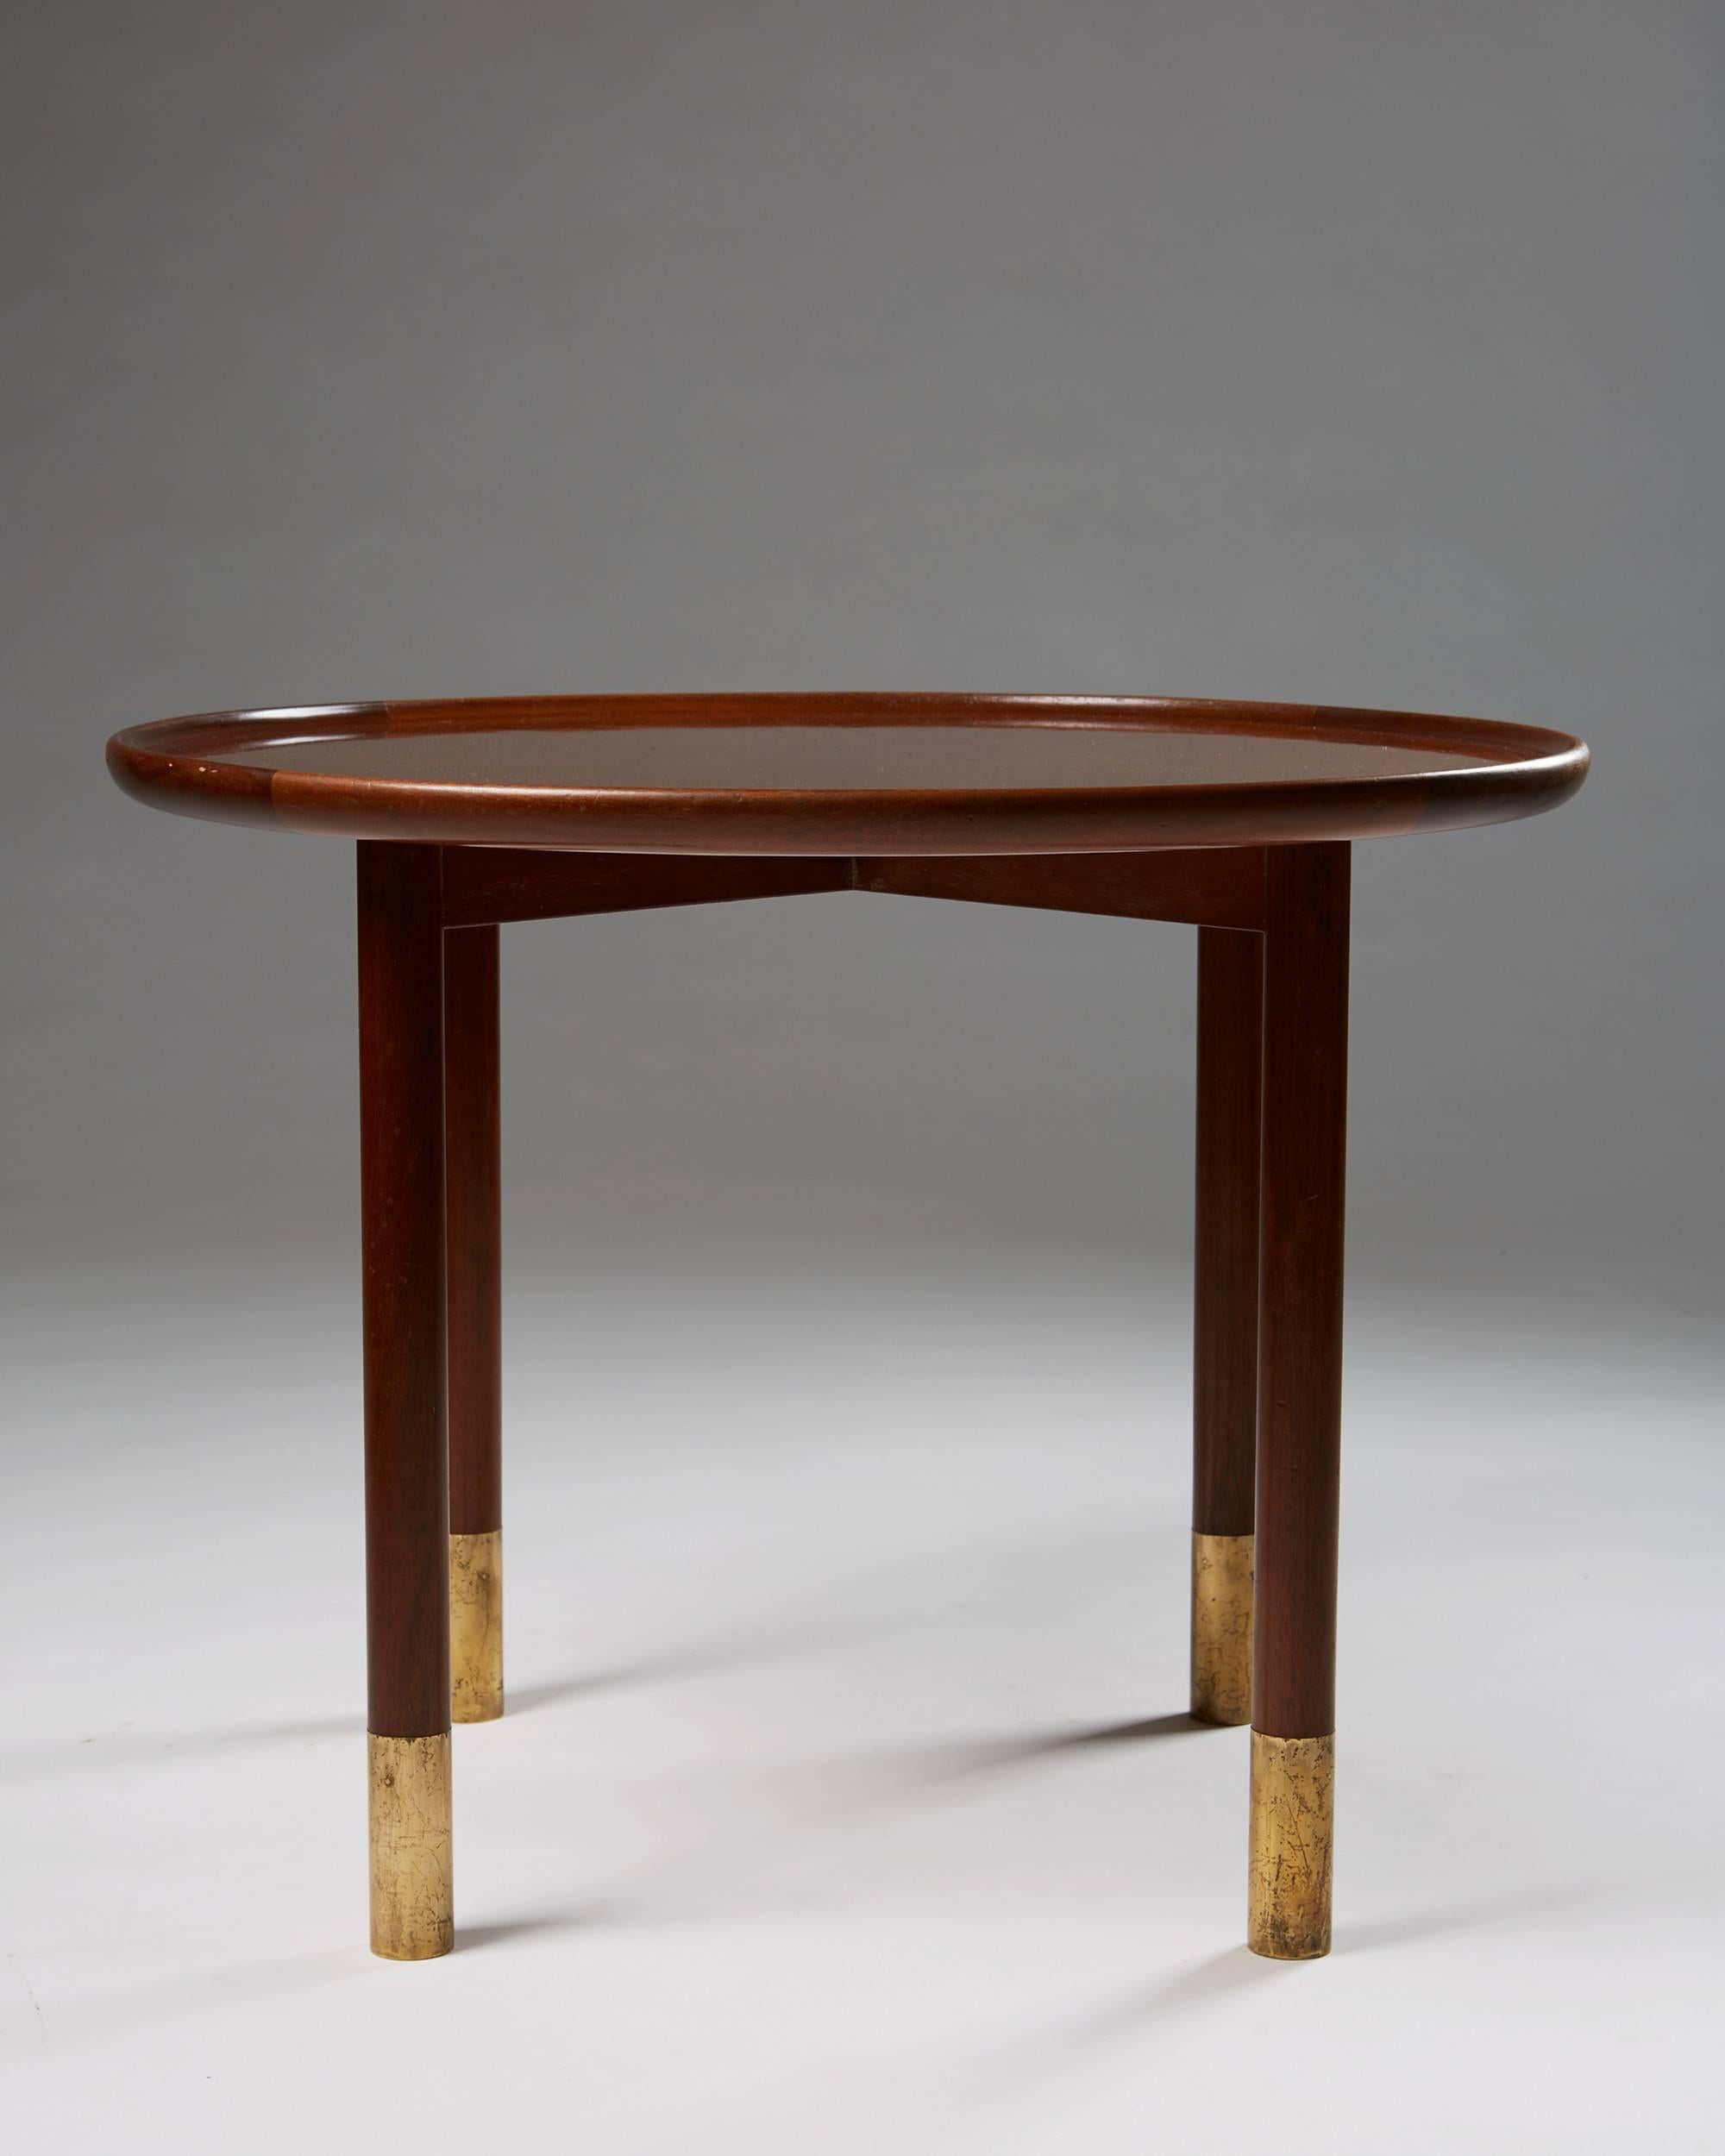 Occasional table attributed to Flemming Lassen, Denmark, 1930s.
Mahogany and brass.

H: 53 cm/ 21''.
D: 70 cm/ 27 1/2''.